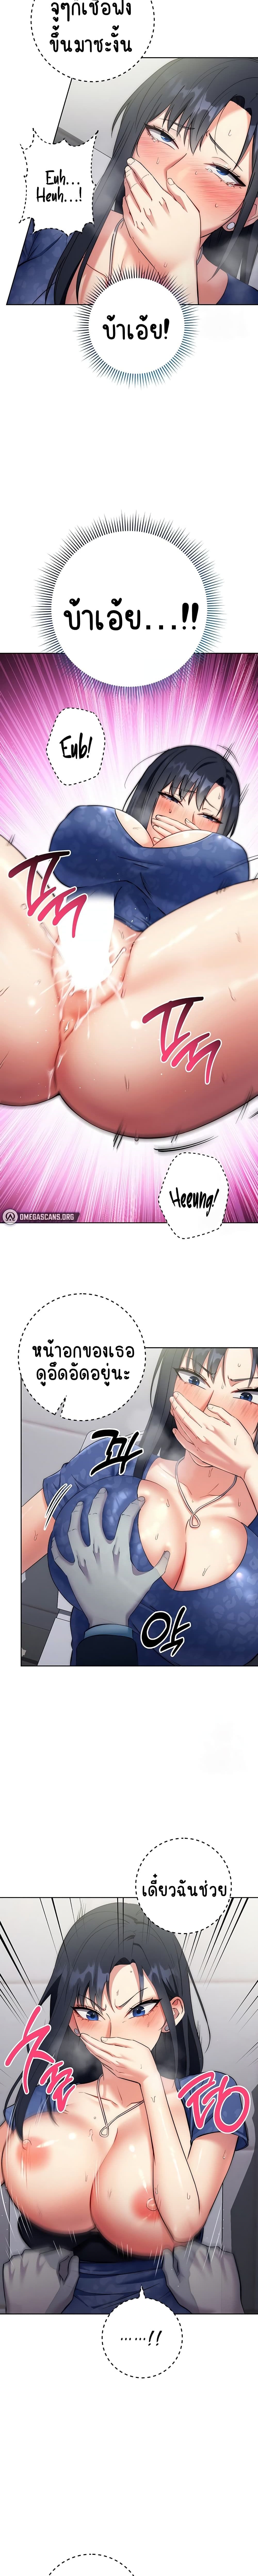 Outsider: The Invisible Man ตอนที่ 6 ภาพ 9